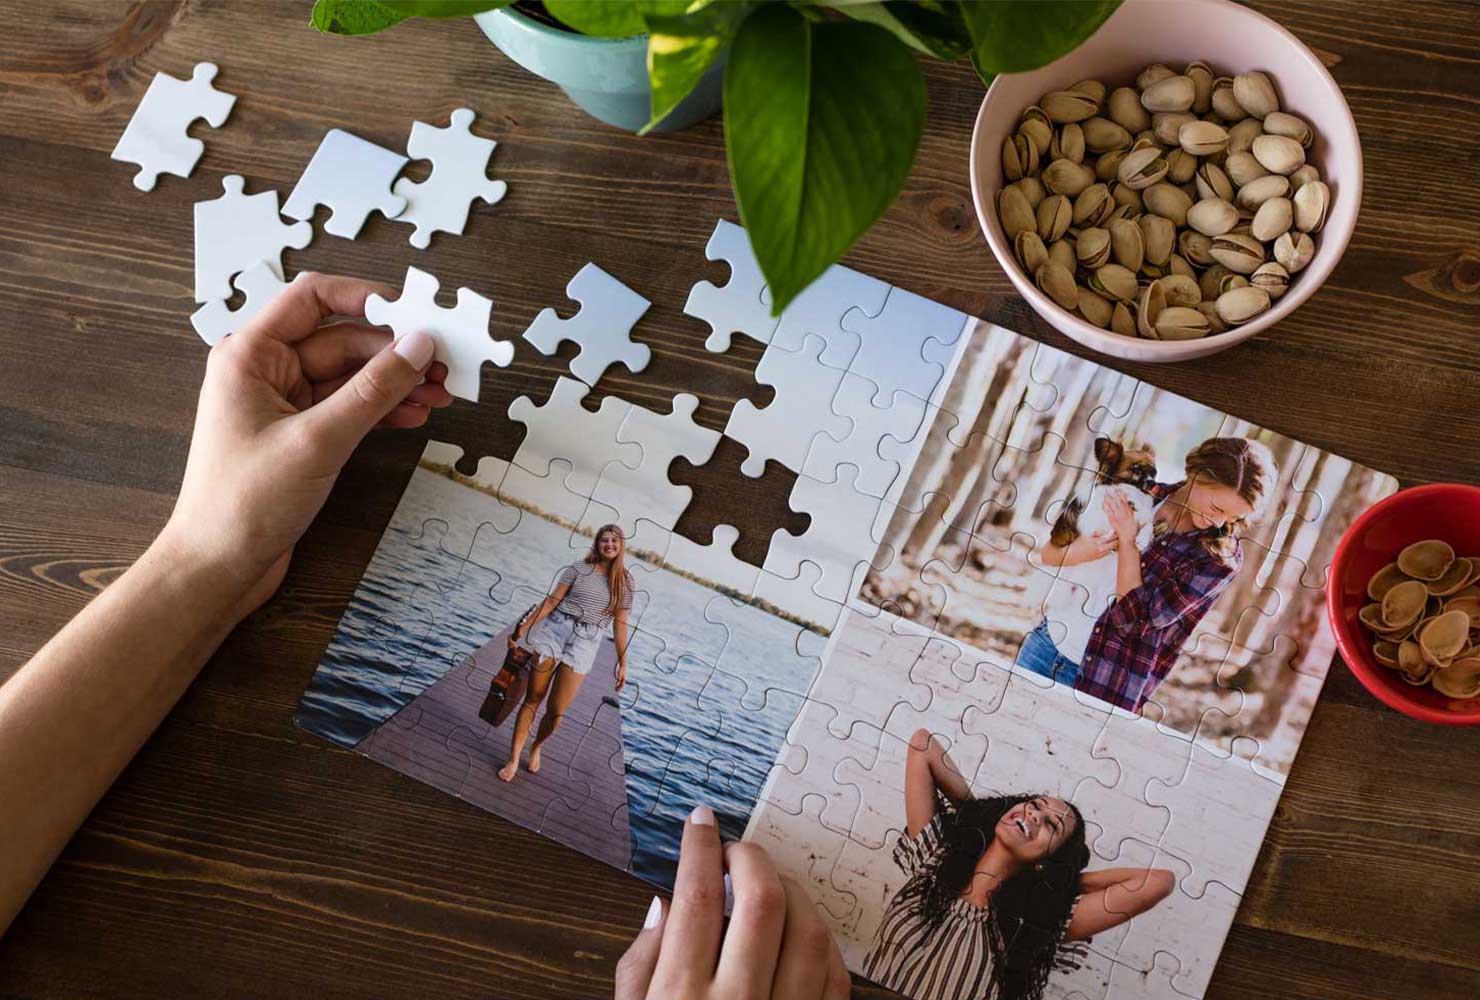 Person putting together a collage puzzle.